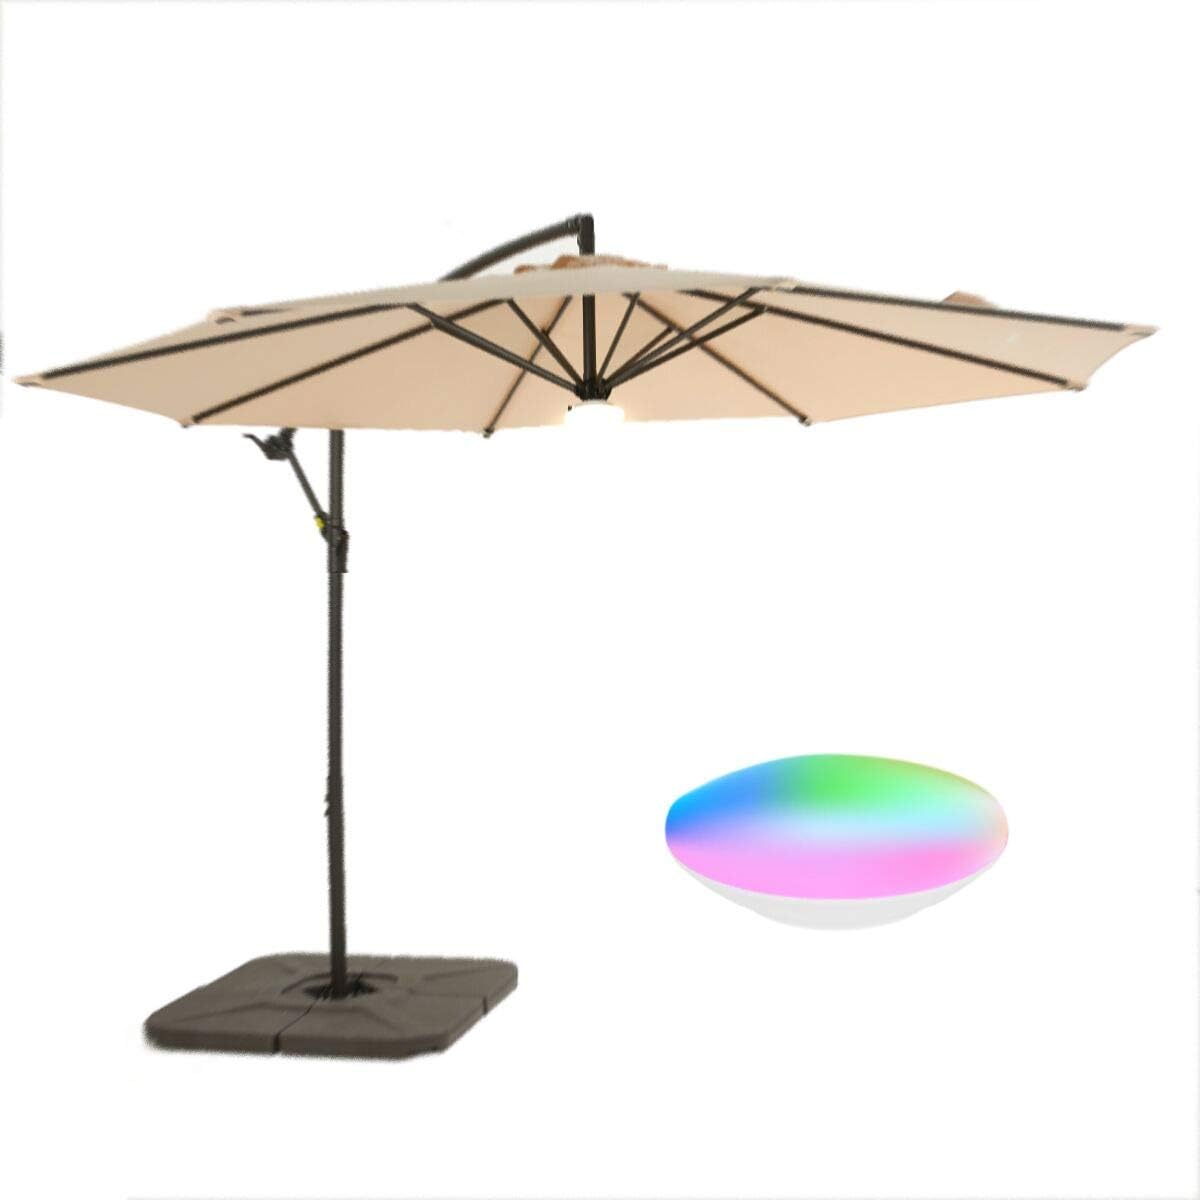 Wikiwiki Light for Umbrella Patio Umbrella Lights Outdoor 8 Colorful Modes 3 Brightness LED Light - High Lumen for Camping, Tents, Yard, or Indoor Use